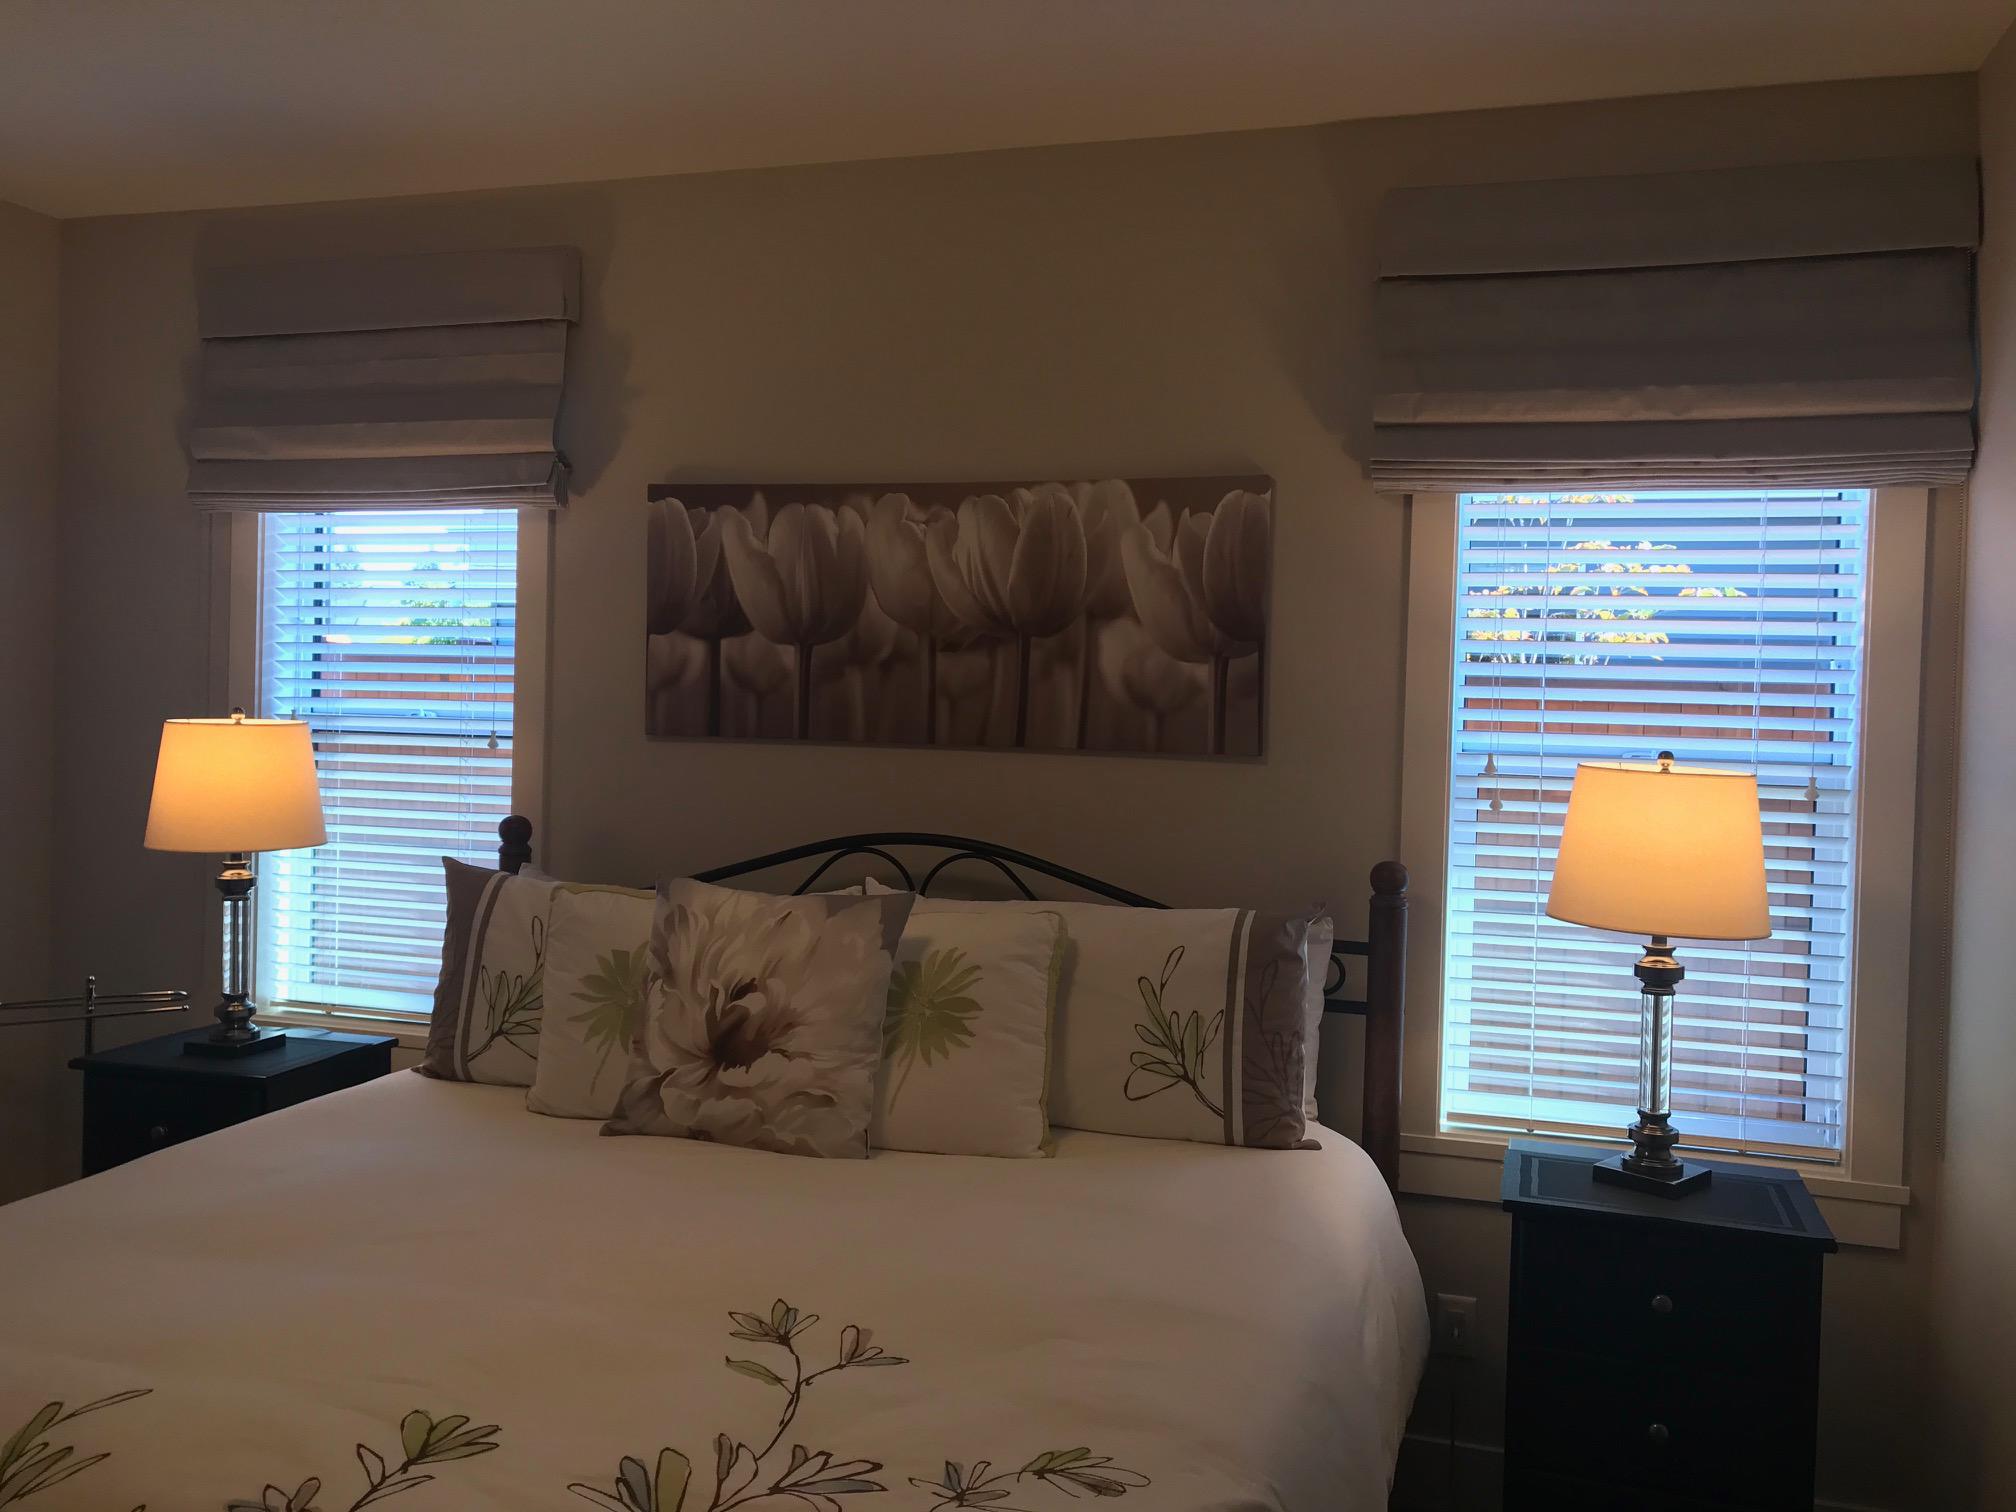 Budget Blinds of Comox Valley and Campbell River Courtenay (250)338-8564